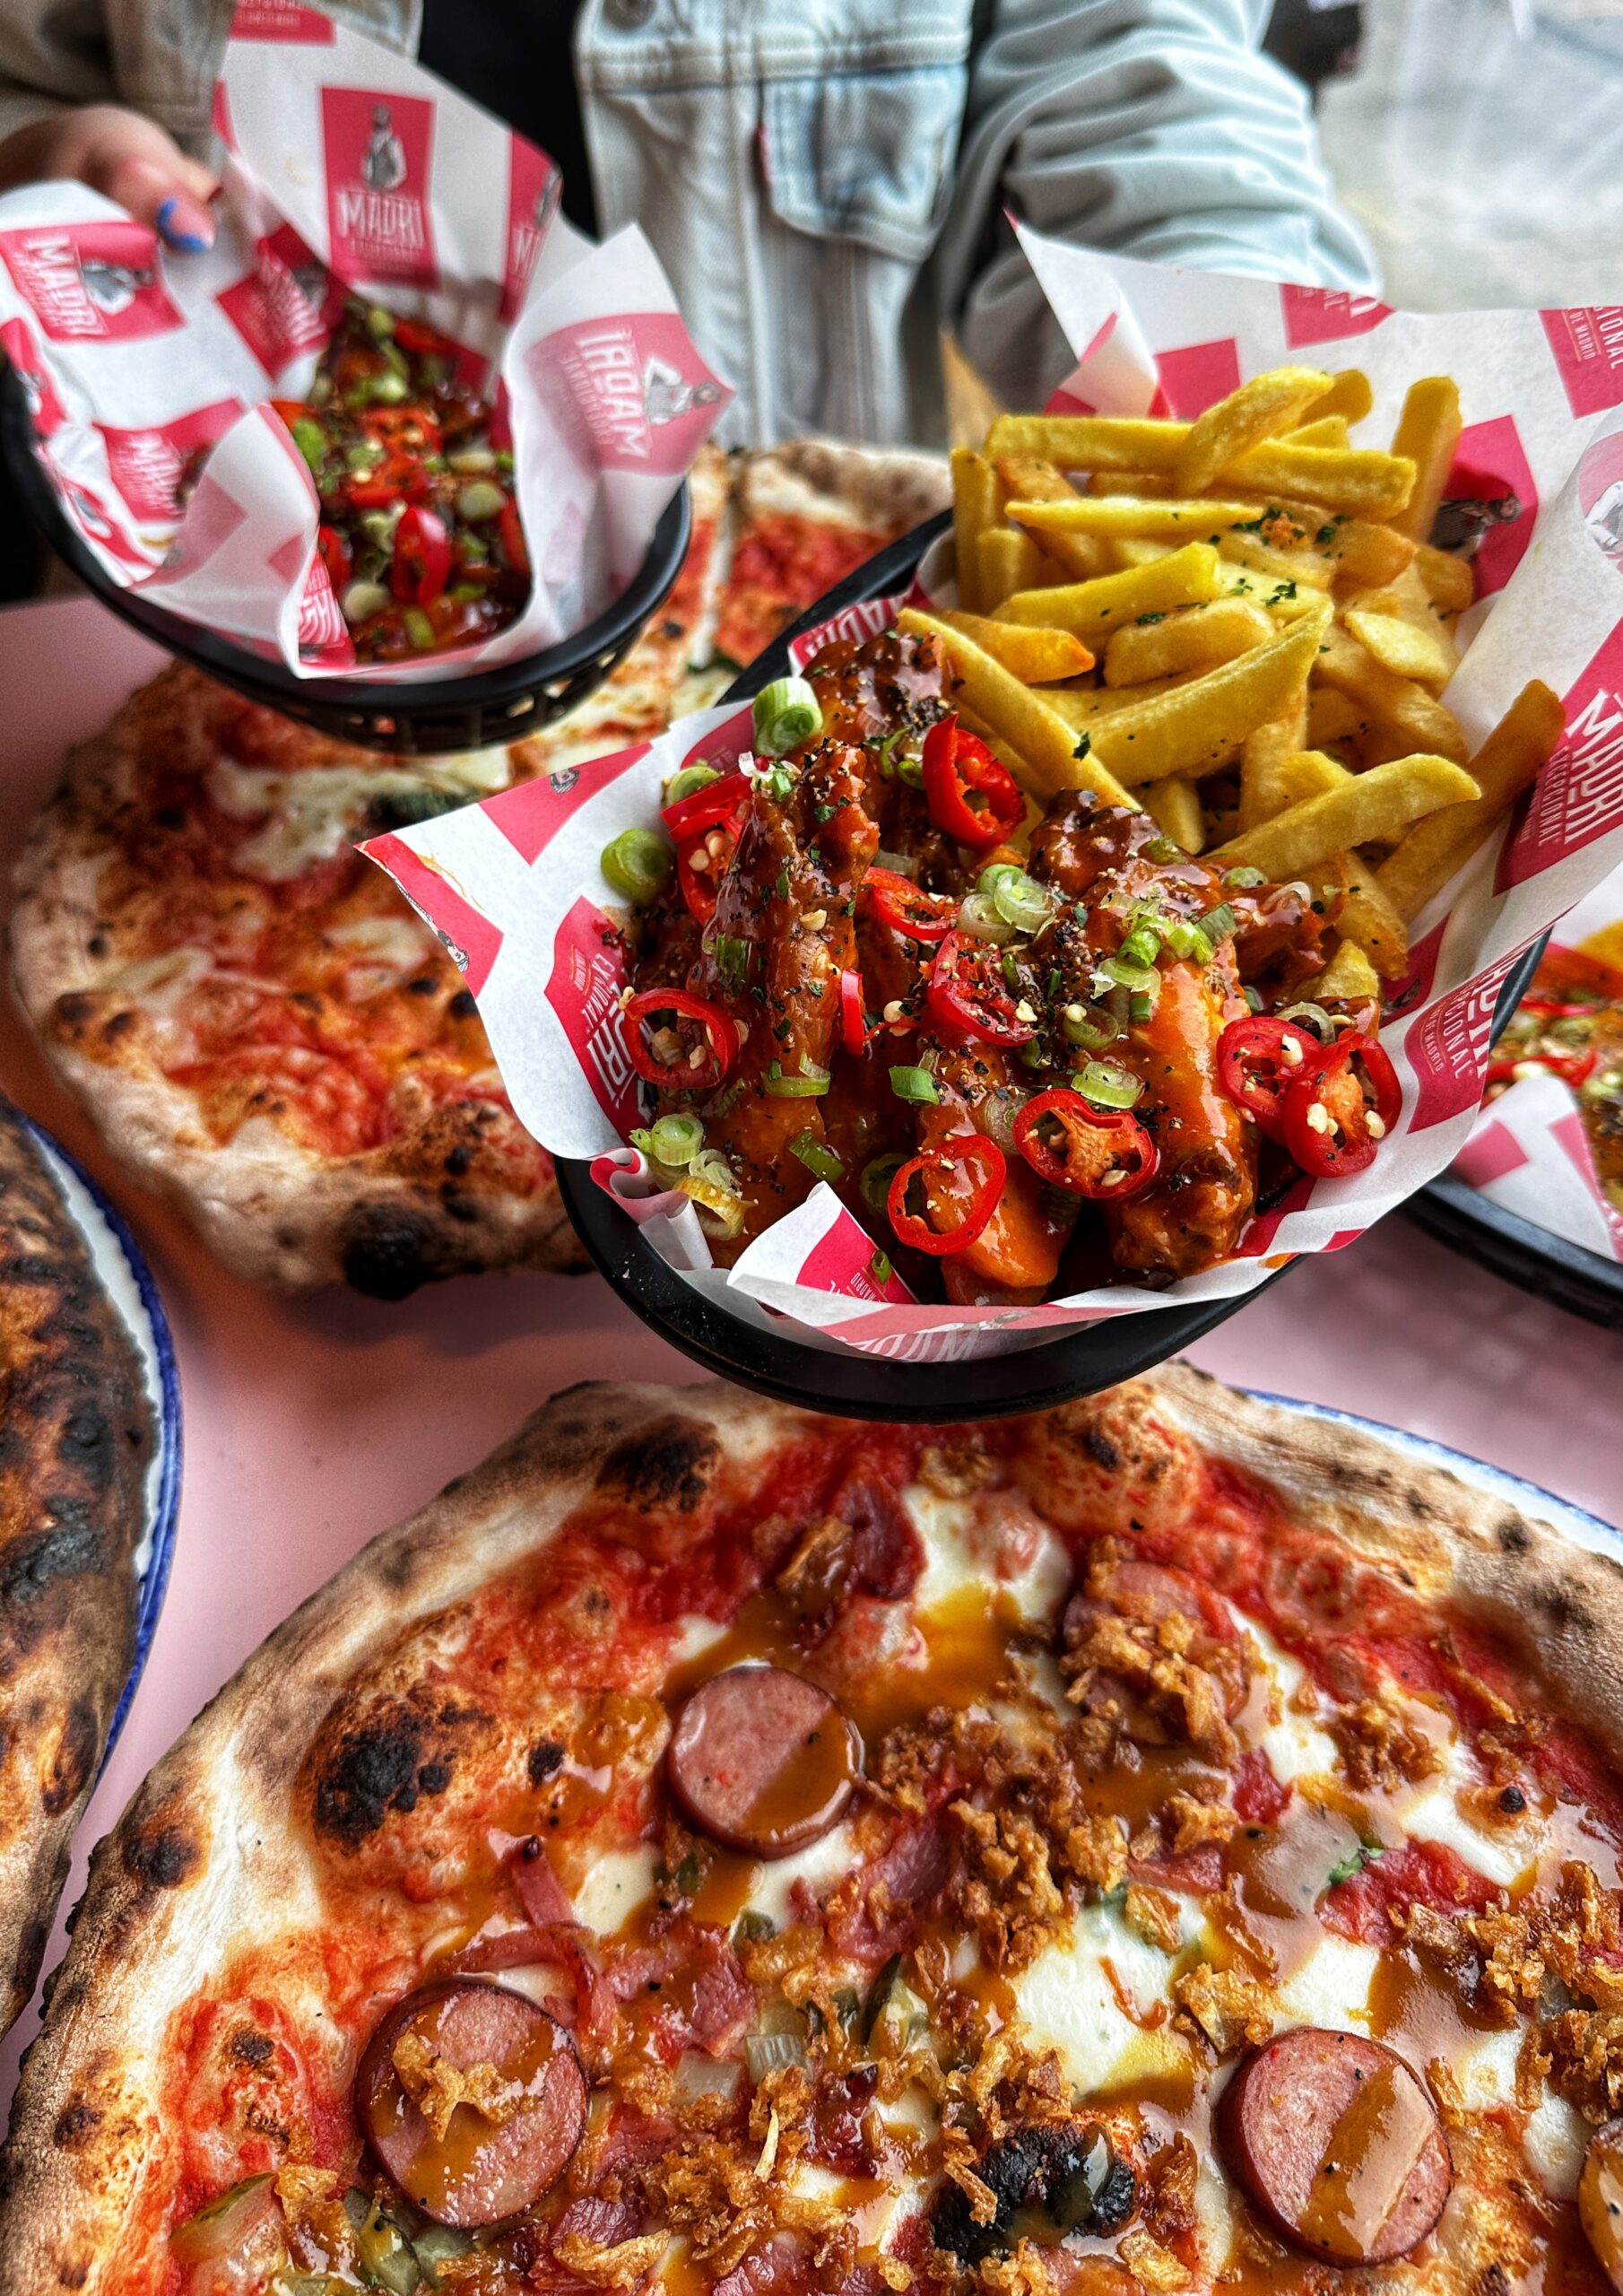 A huge bowling alley with its own street food is opening in Trafford